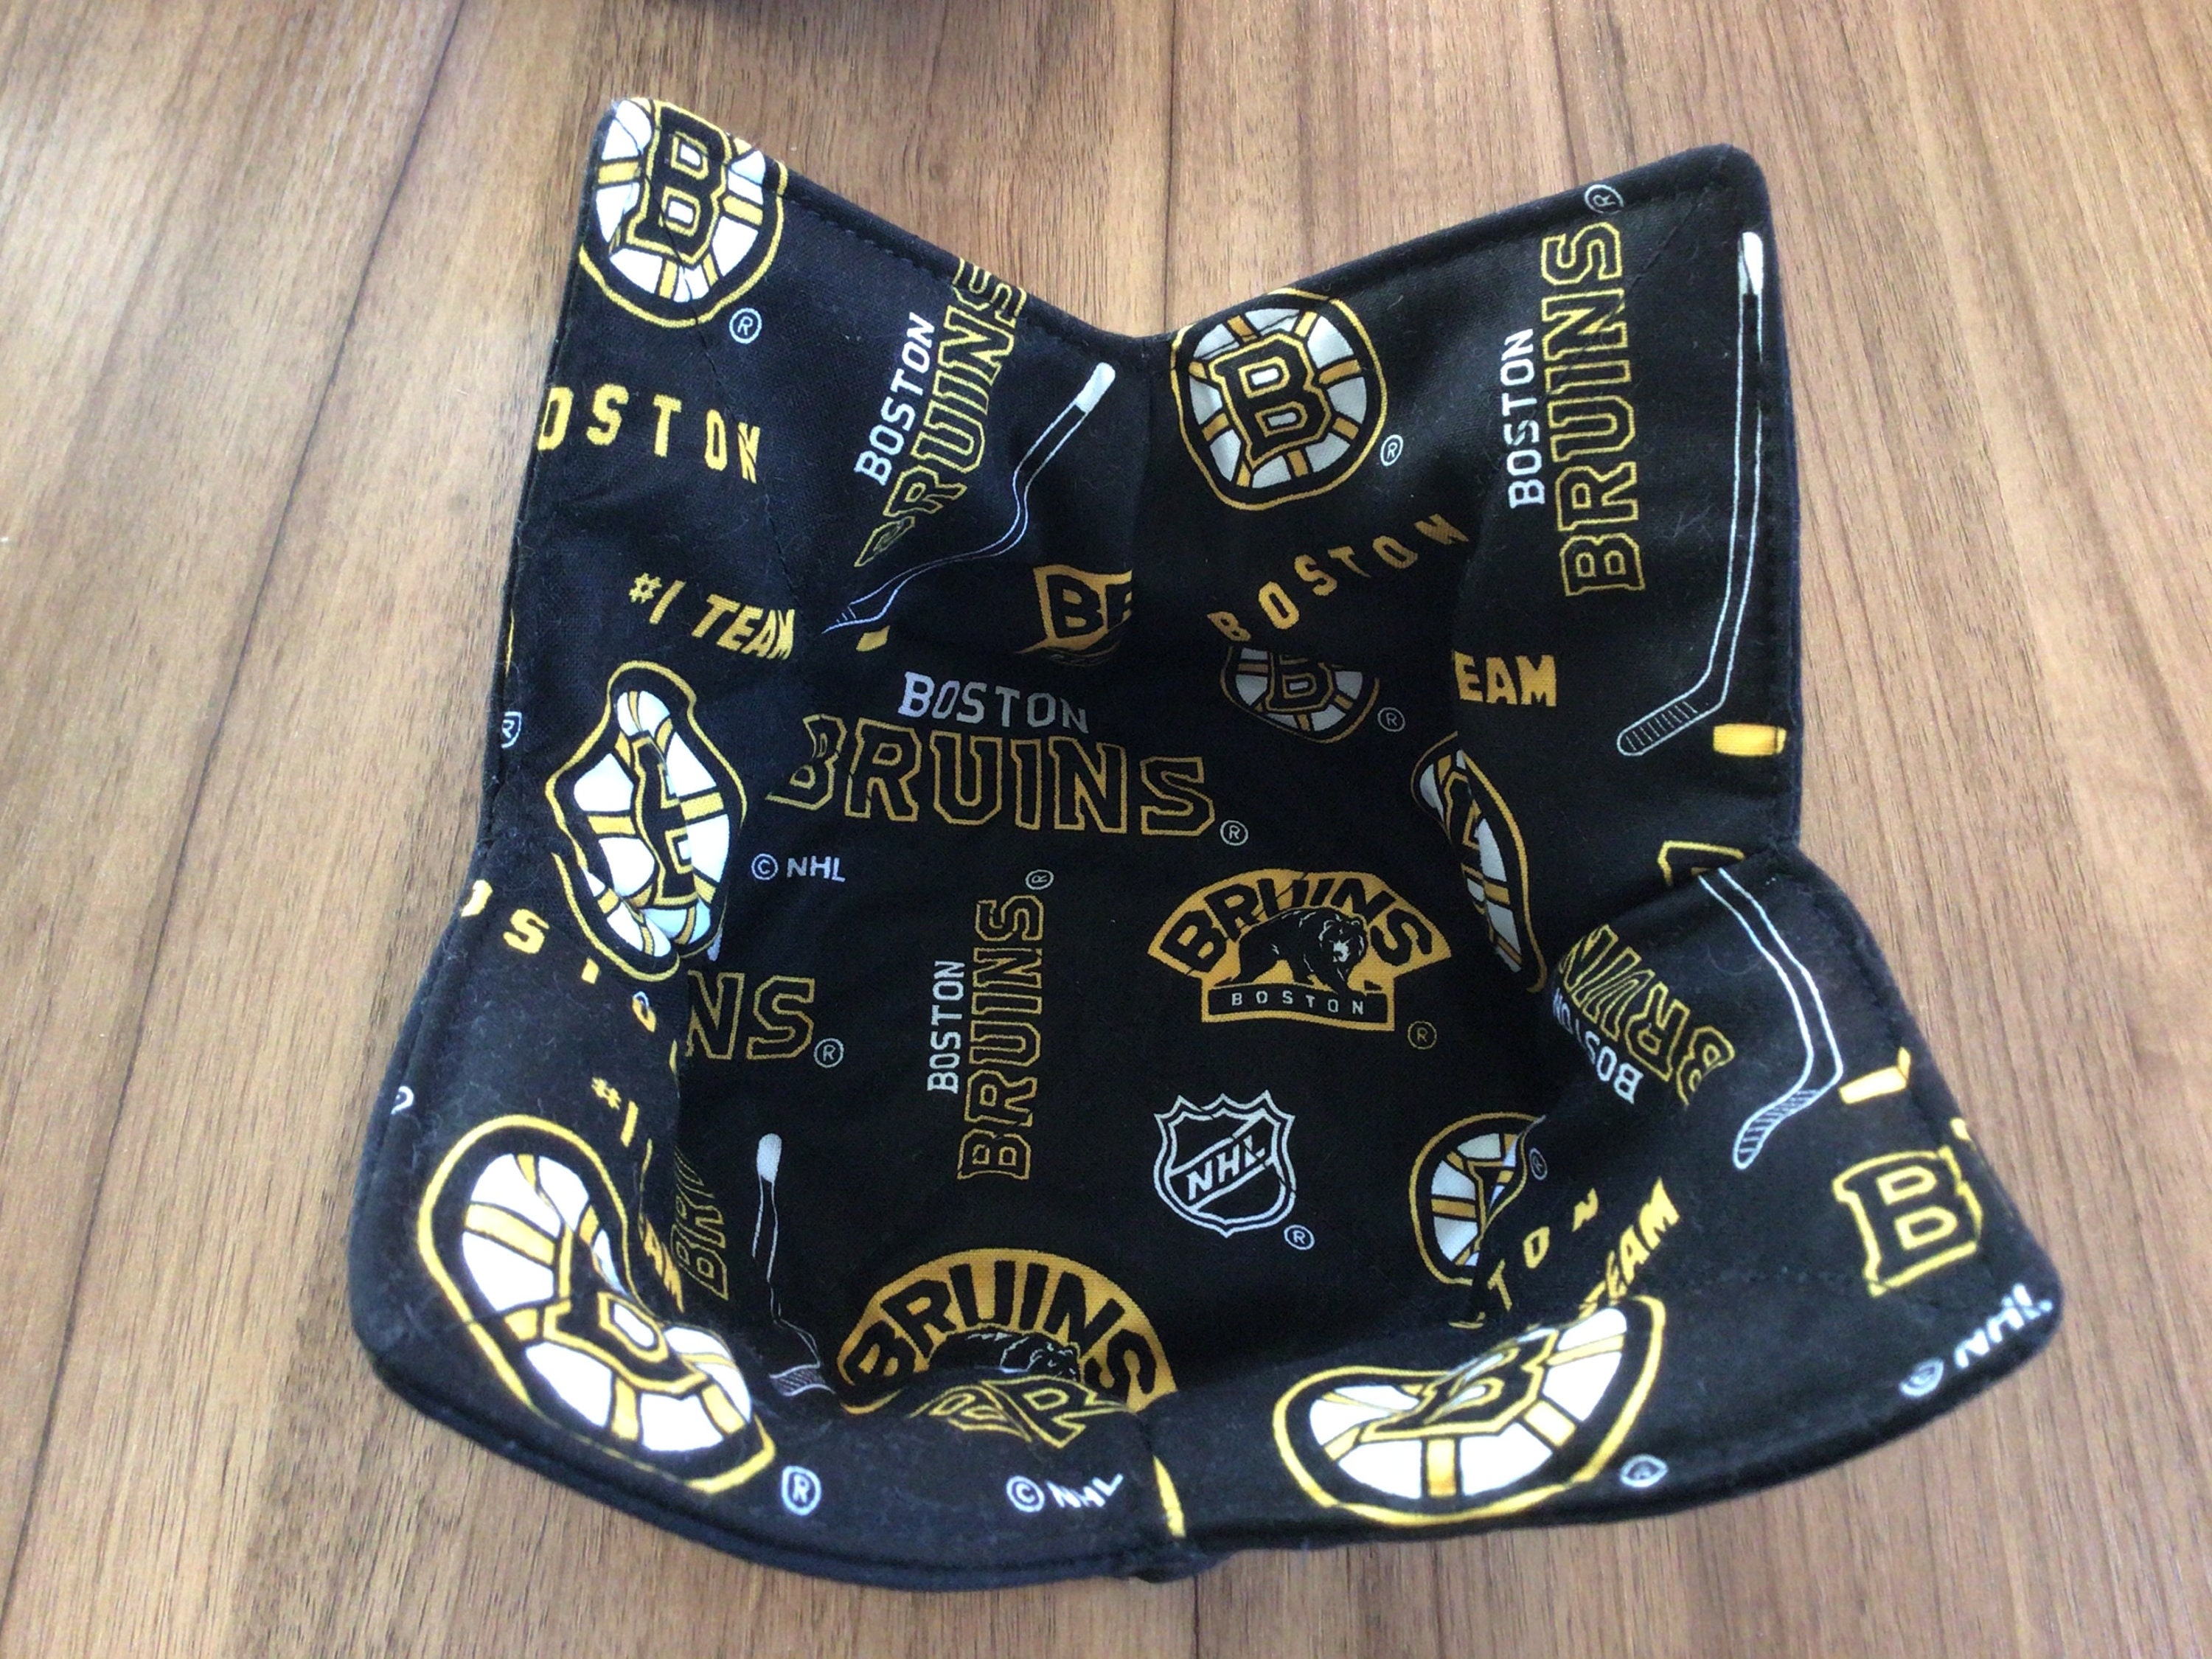 Boston Bruins Donald Hoodie Zip Hoodie Christmas Fans All Over Printed Gift  For Men And Women - Banantees